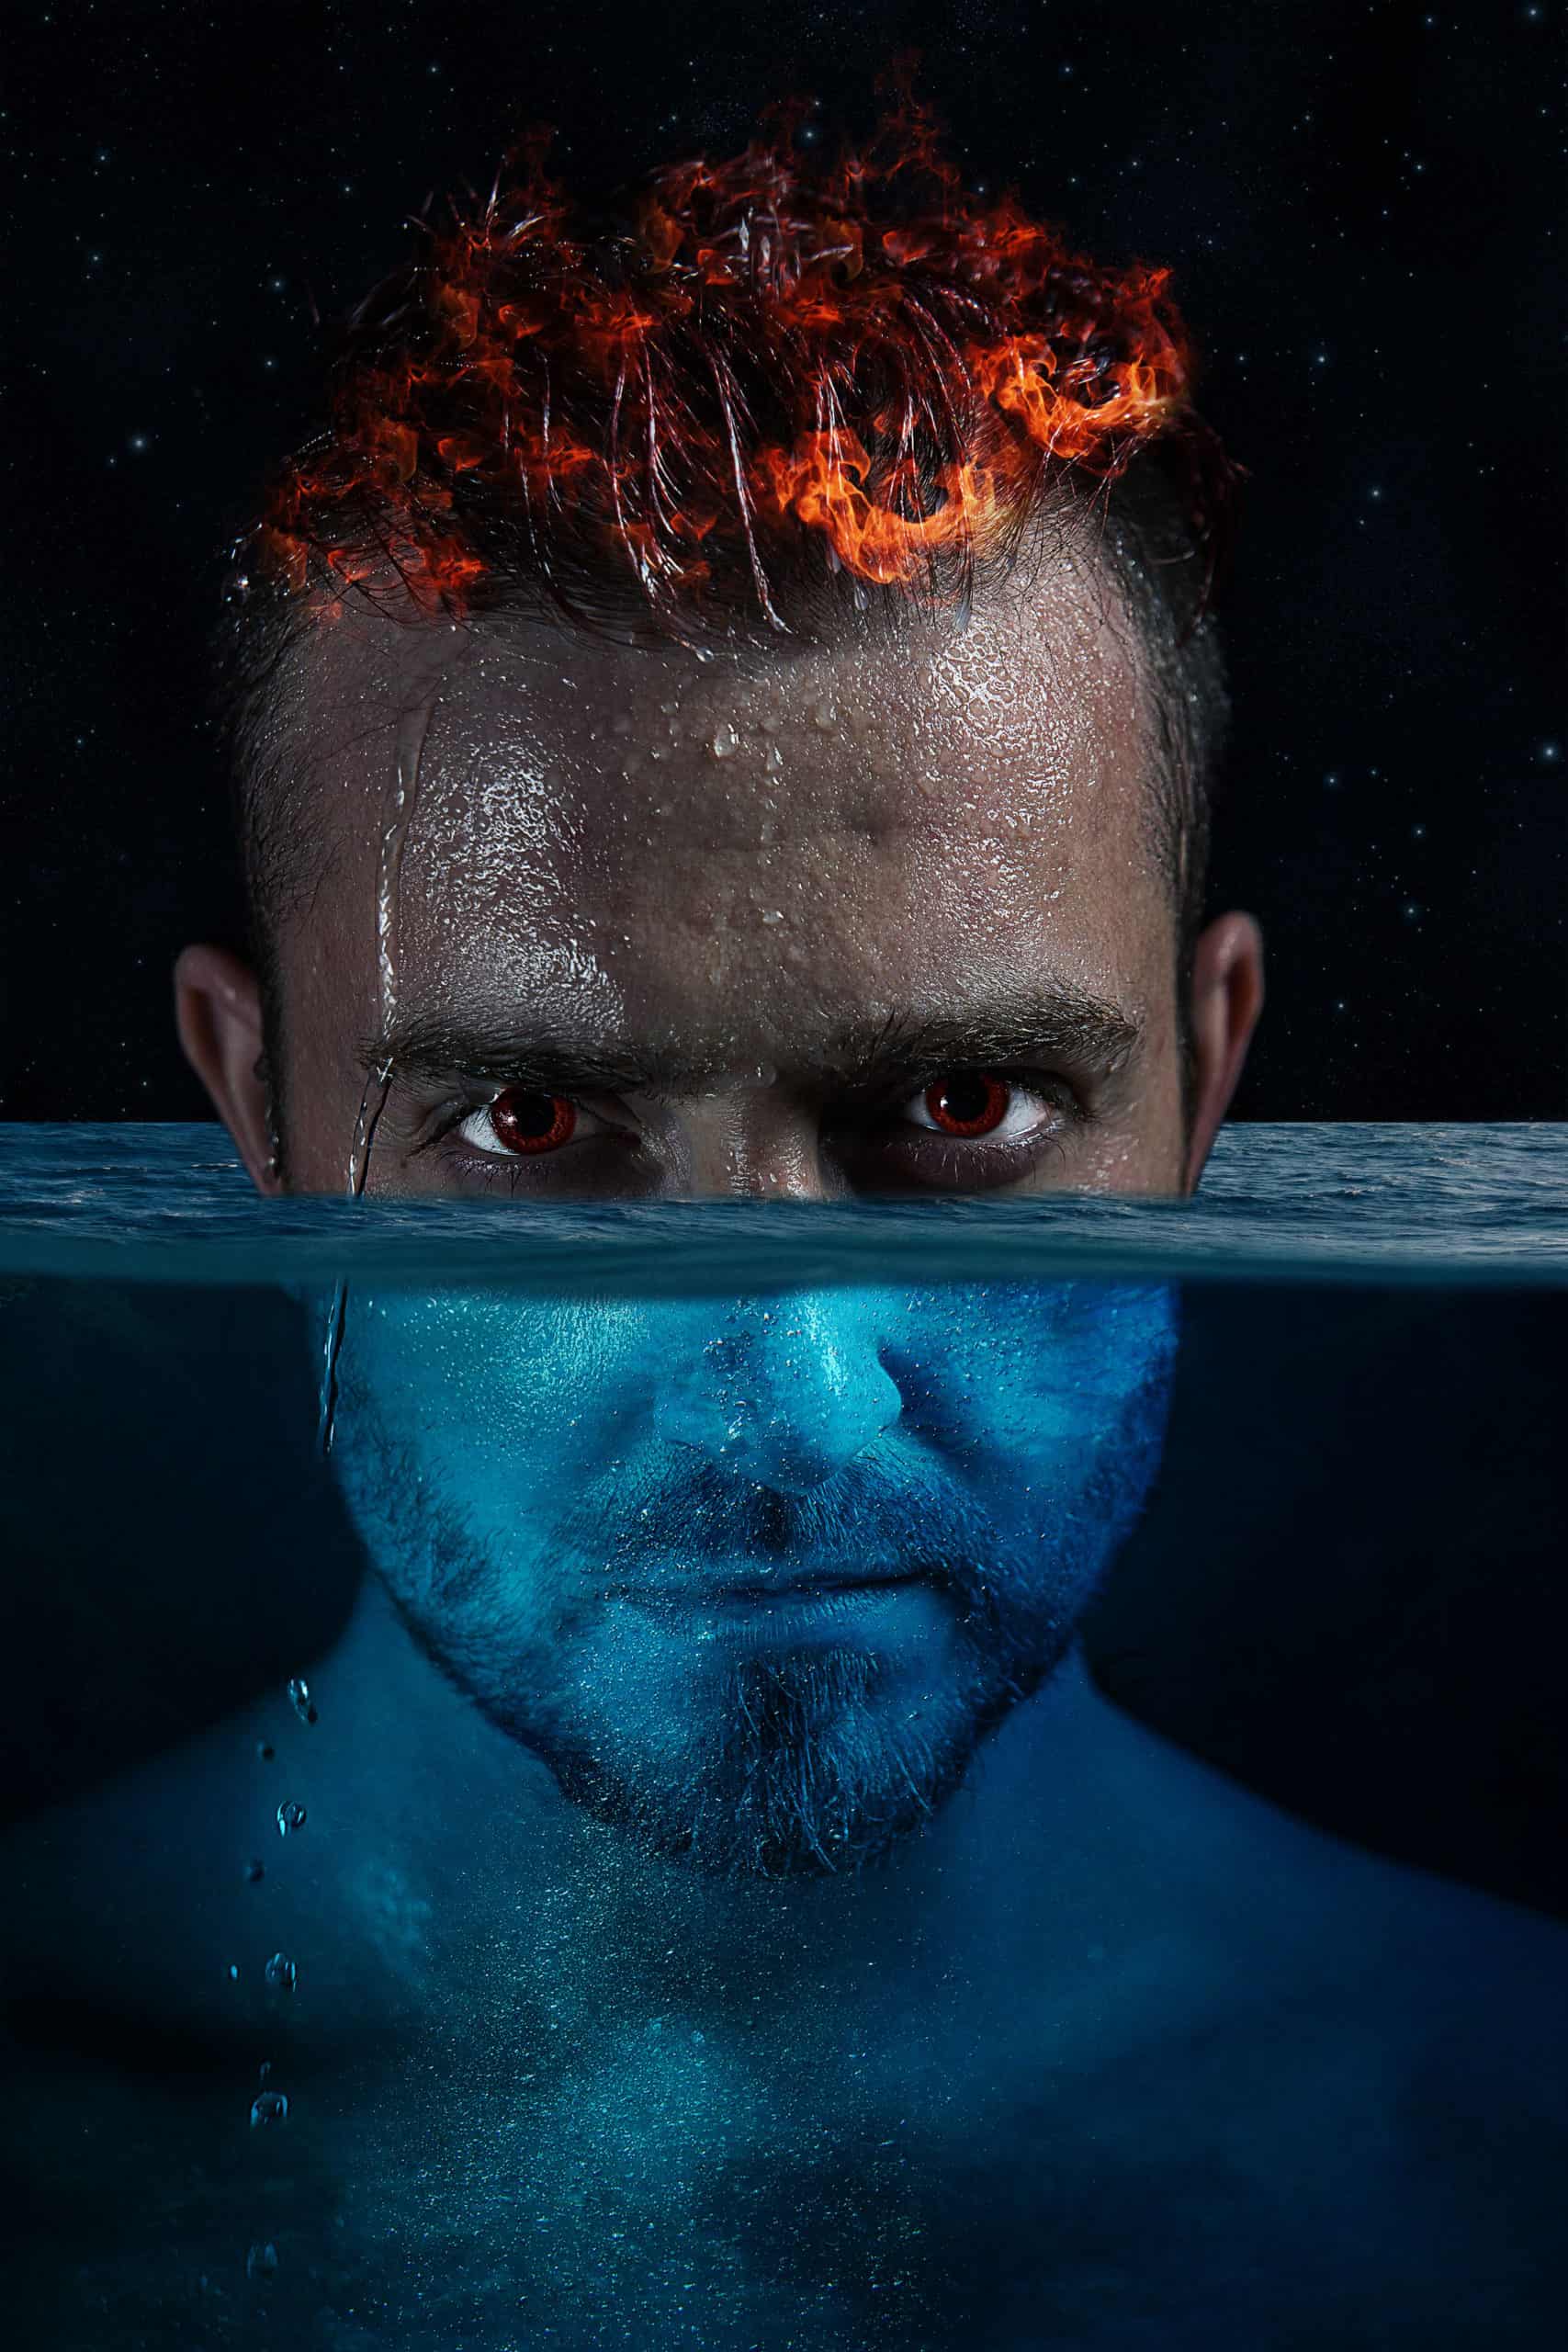 How to Create a Water & Fire Portrait Photo Manipulation in Photoshop